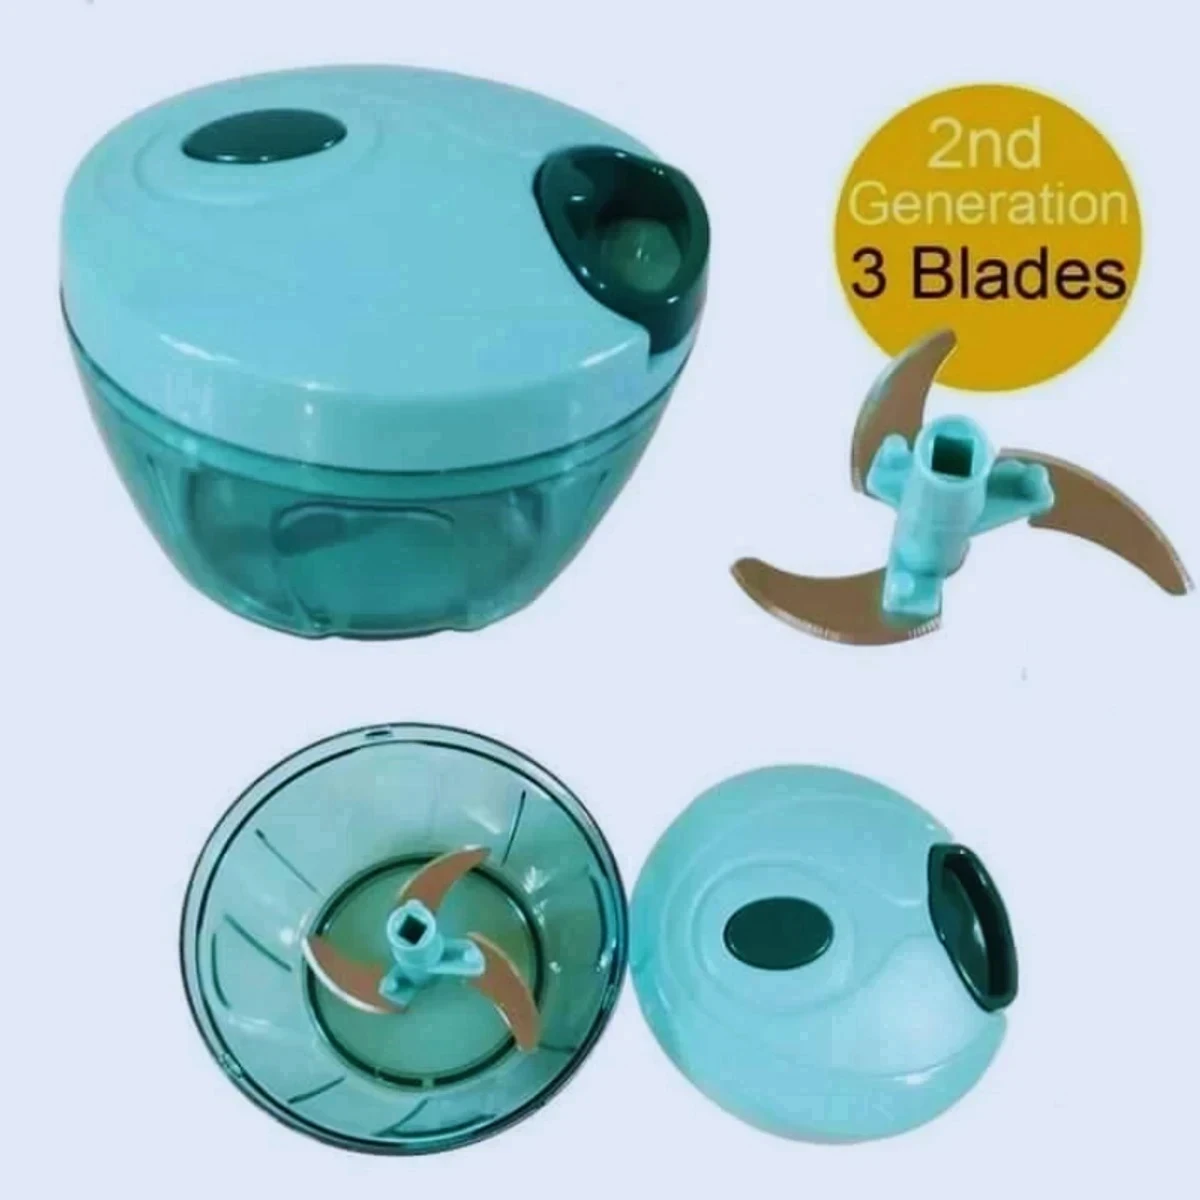 2 in 1 Vegetable Cutter